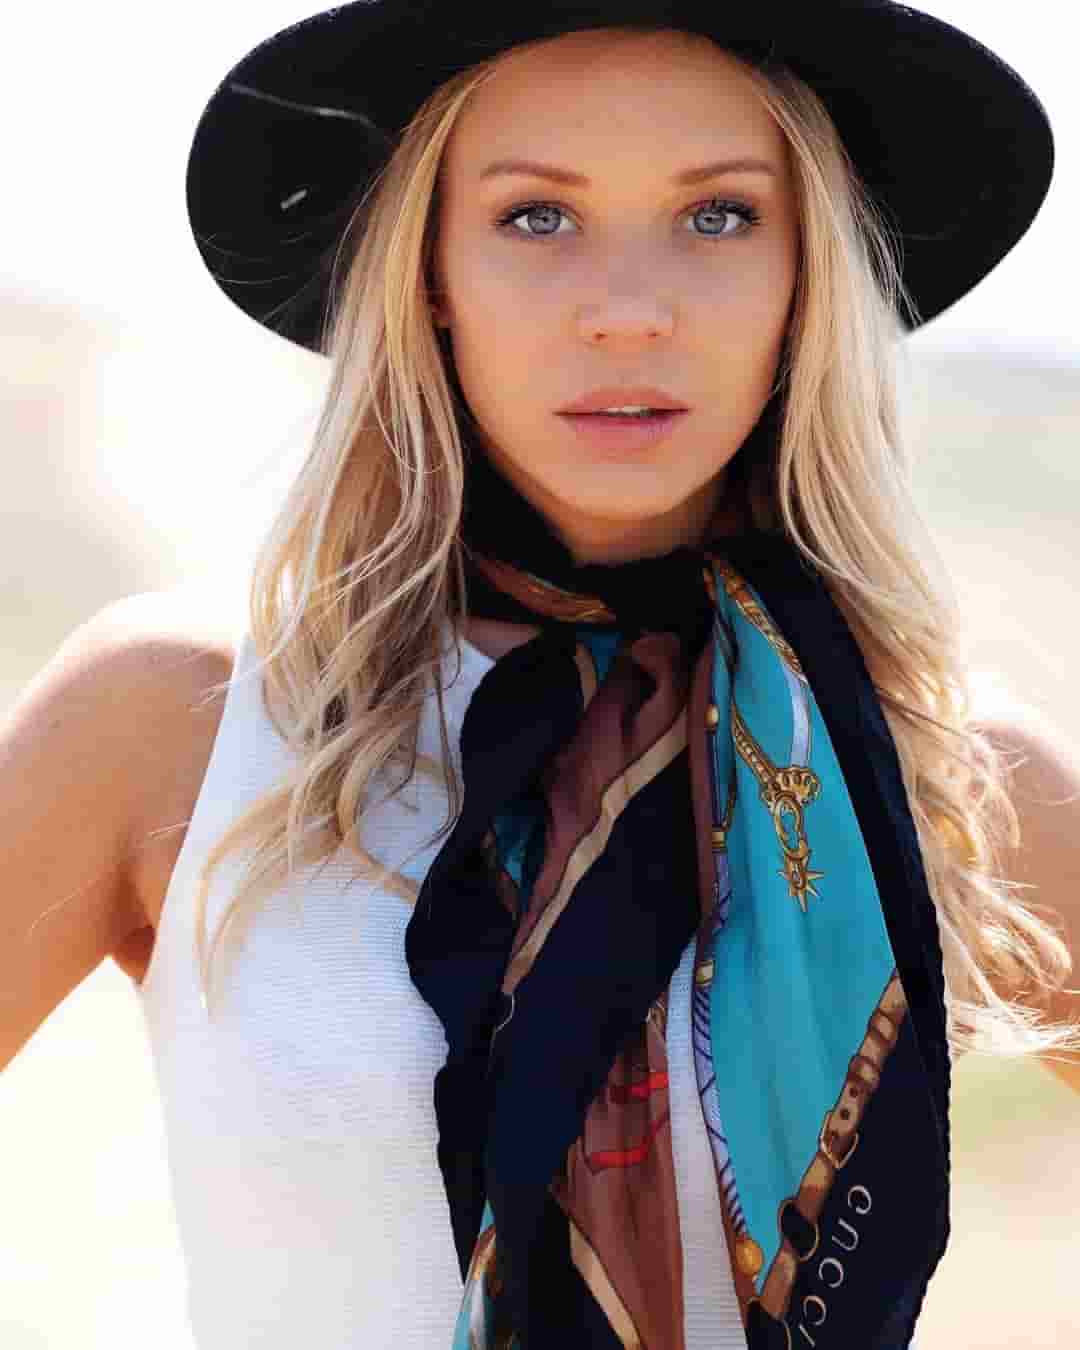 Tara Holt looking stunning in her black hat and scarf.